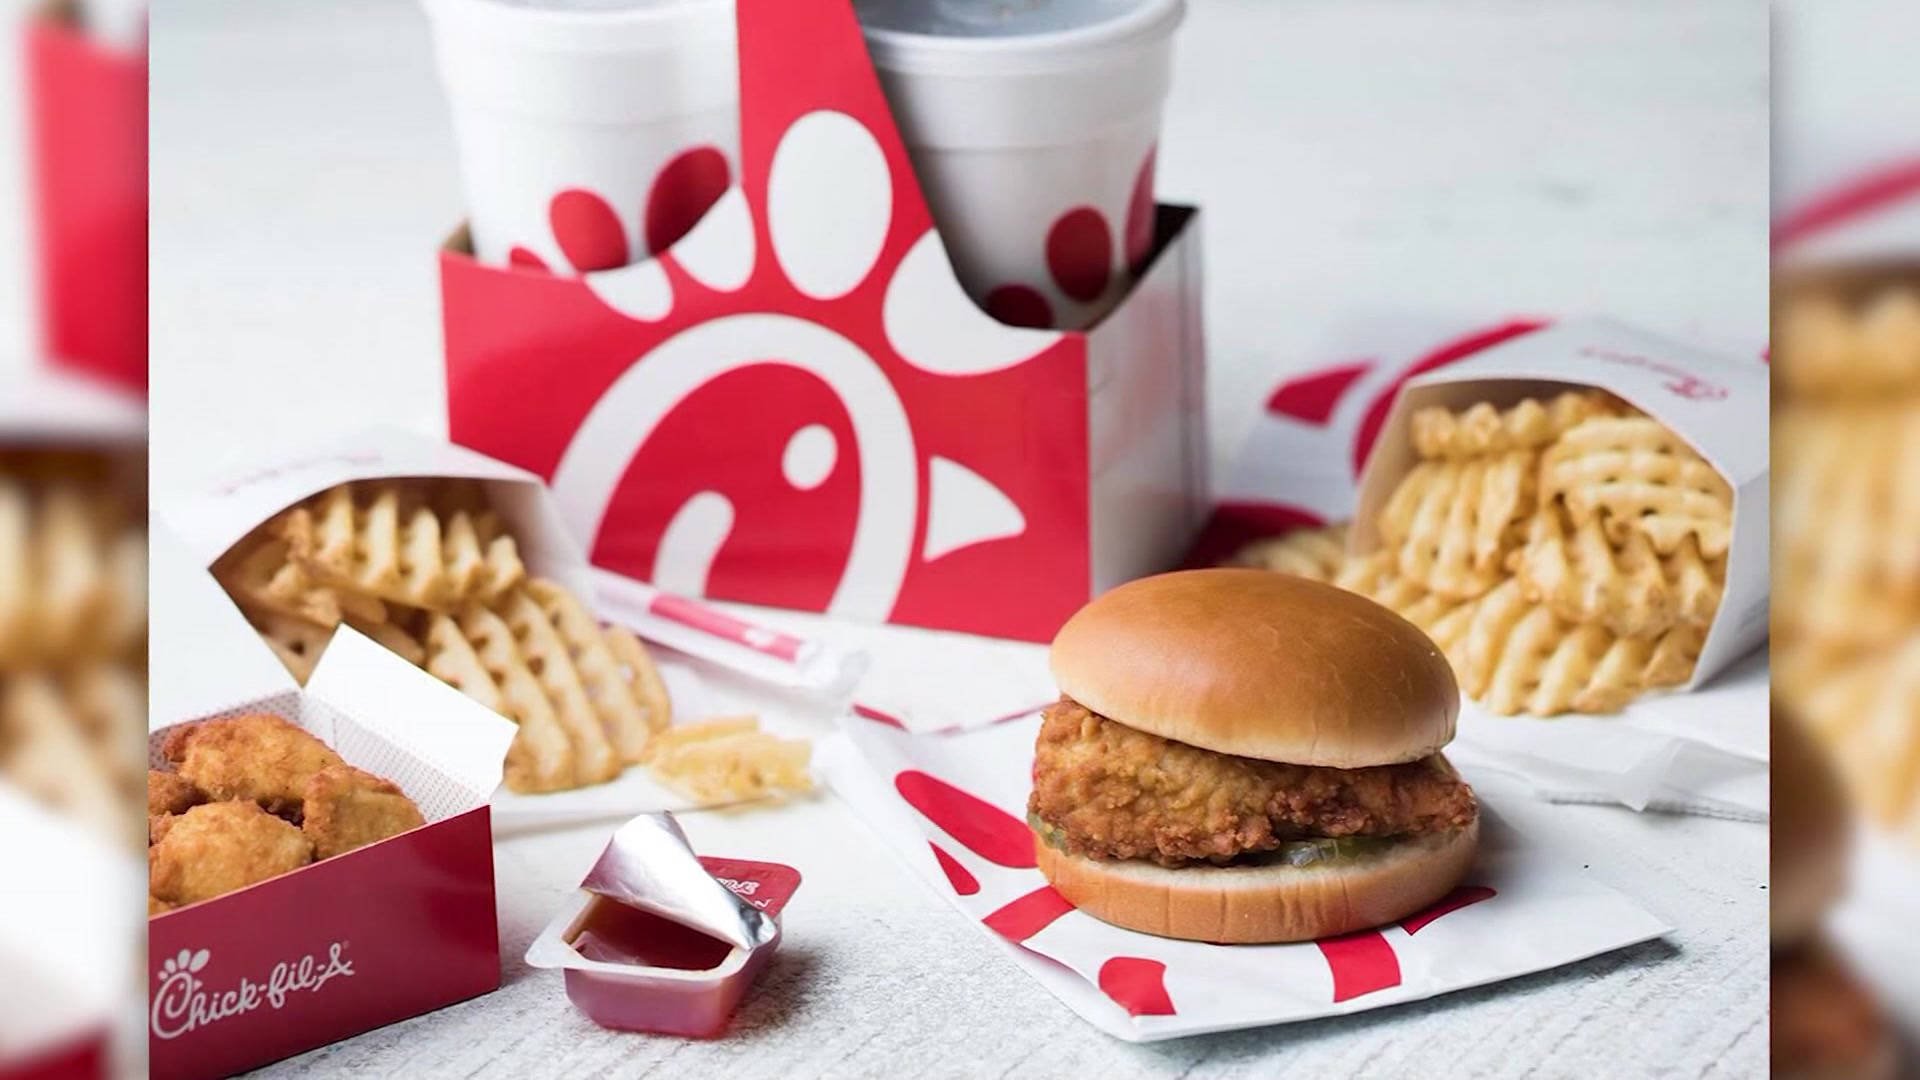 Savour The Delightful Variety At Chick-fil-a Background